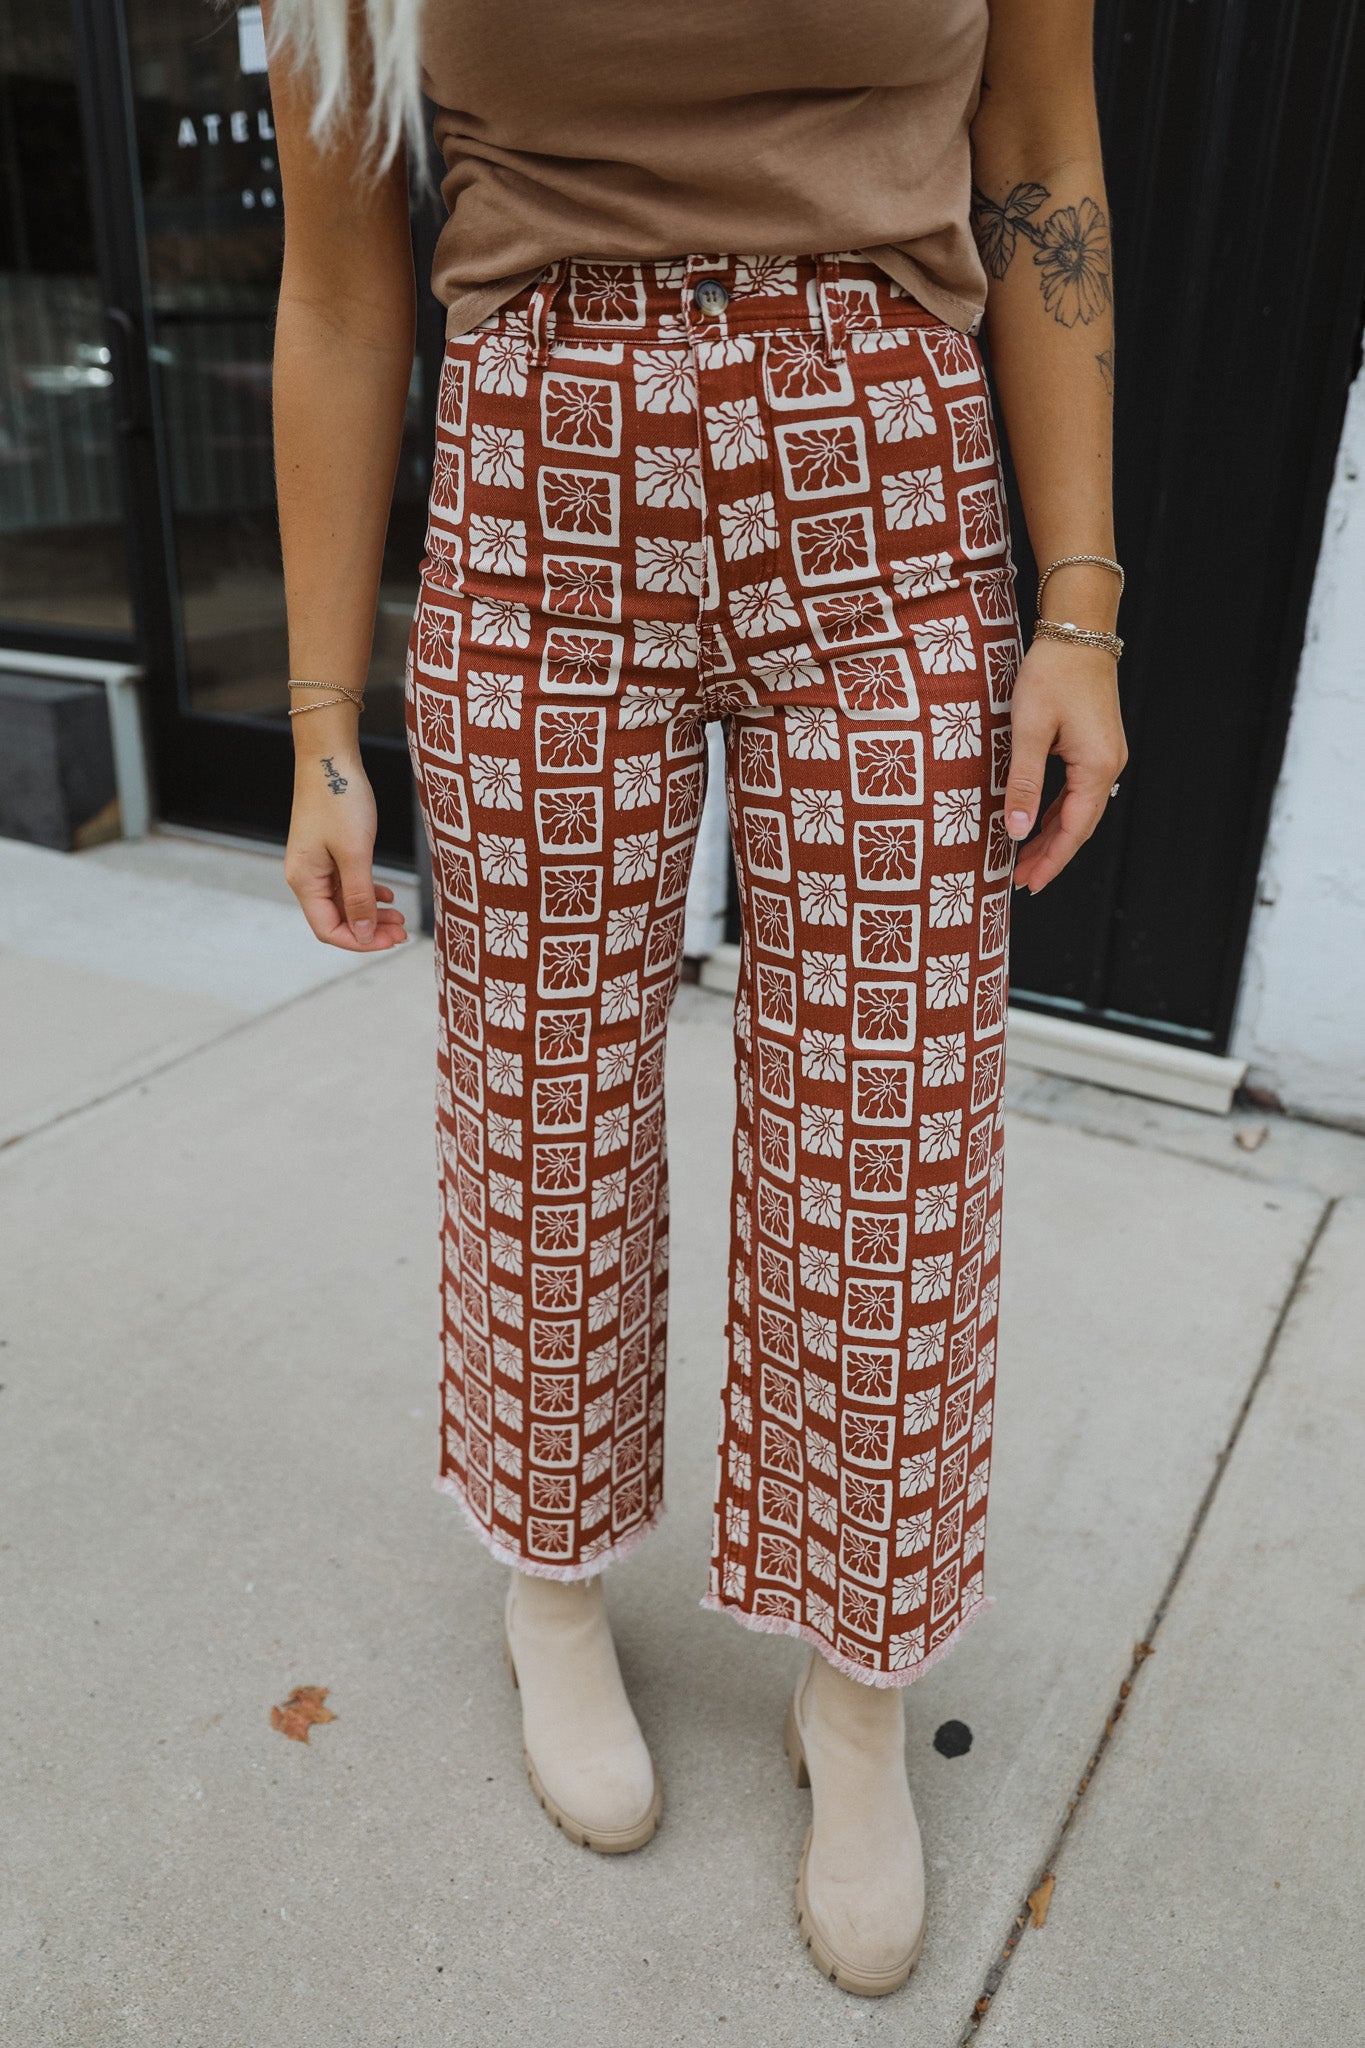 The Free Fall pant pairs a waist-accentuating high rise with a cool, wide leg. Made with blended cotton, these printed pants are fitted and flattering through the hips, with button-fly closure, a raw hem, and just enough stretch to keep them all-day comfy.